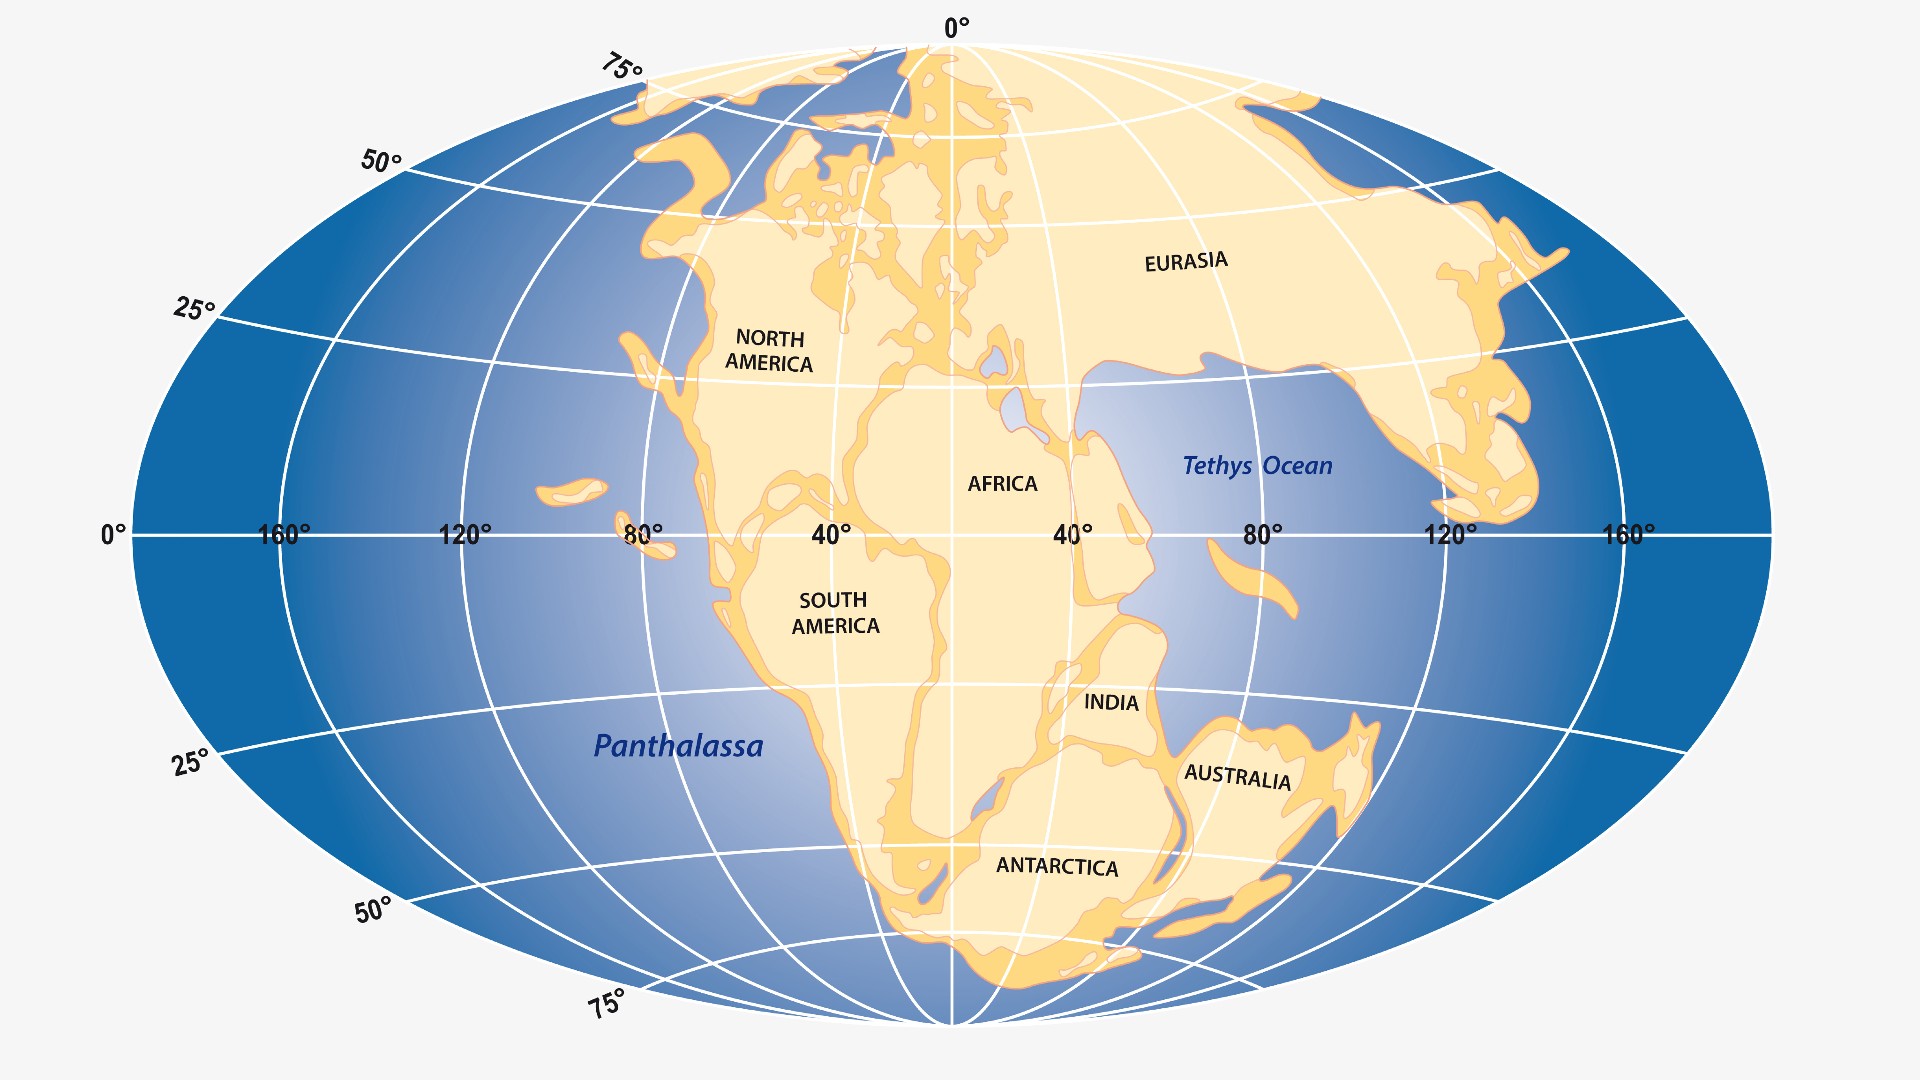 Vector Graphic Of The Land Mass Of The Supercontinent Pangea_Rainer Lesniewski Via Getty Images